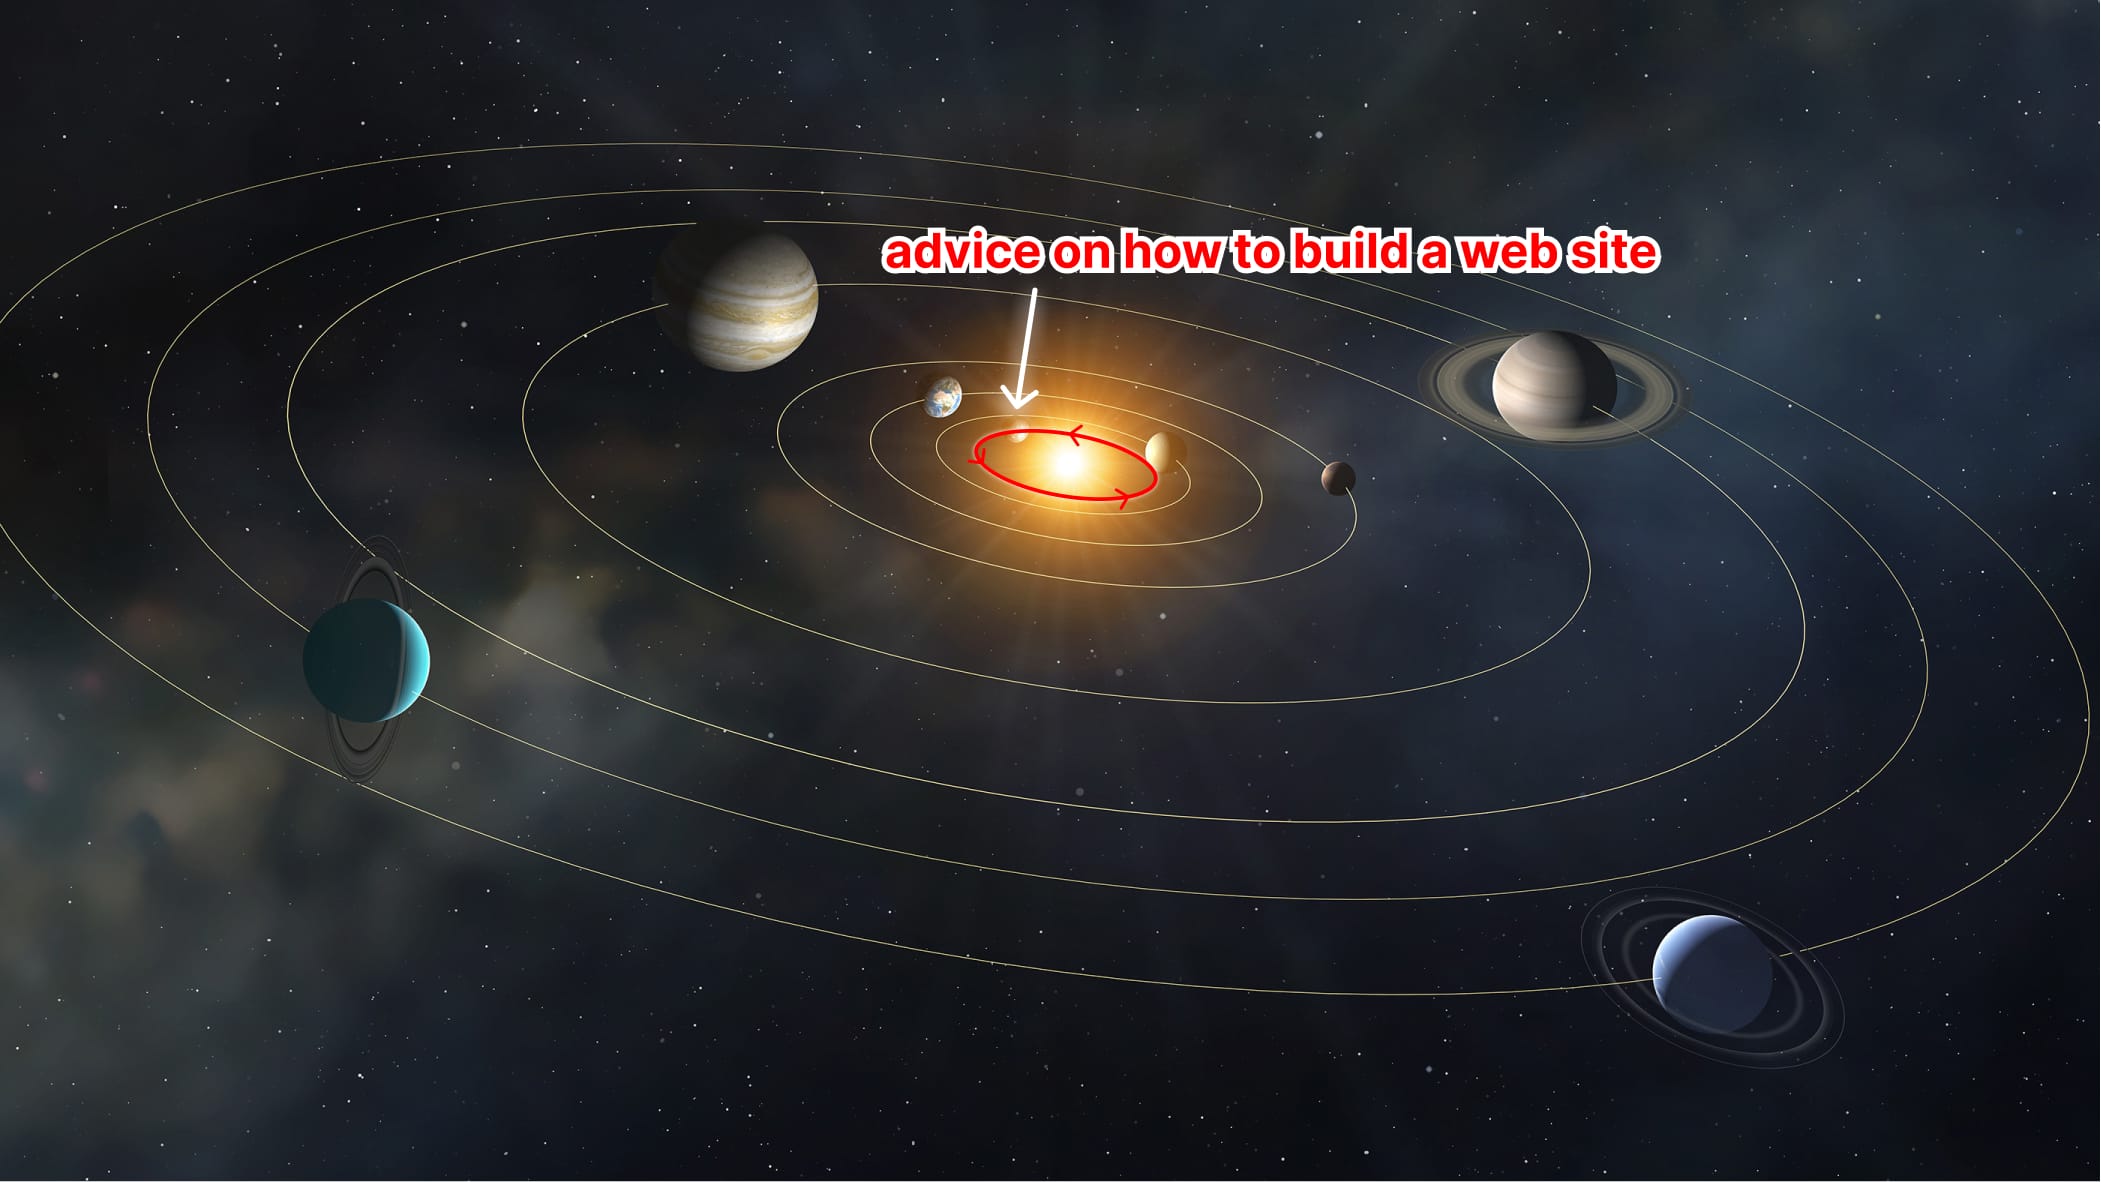 Illustration of the solar system with the sun at the center and the planets orbiting it with their orbit paths denoted by lines. The orbit of mercury is highlighted with a red overlay with the text 'advice on how to build a web site' overlaid on top.